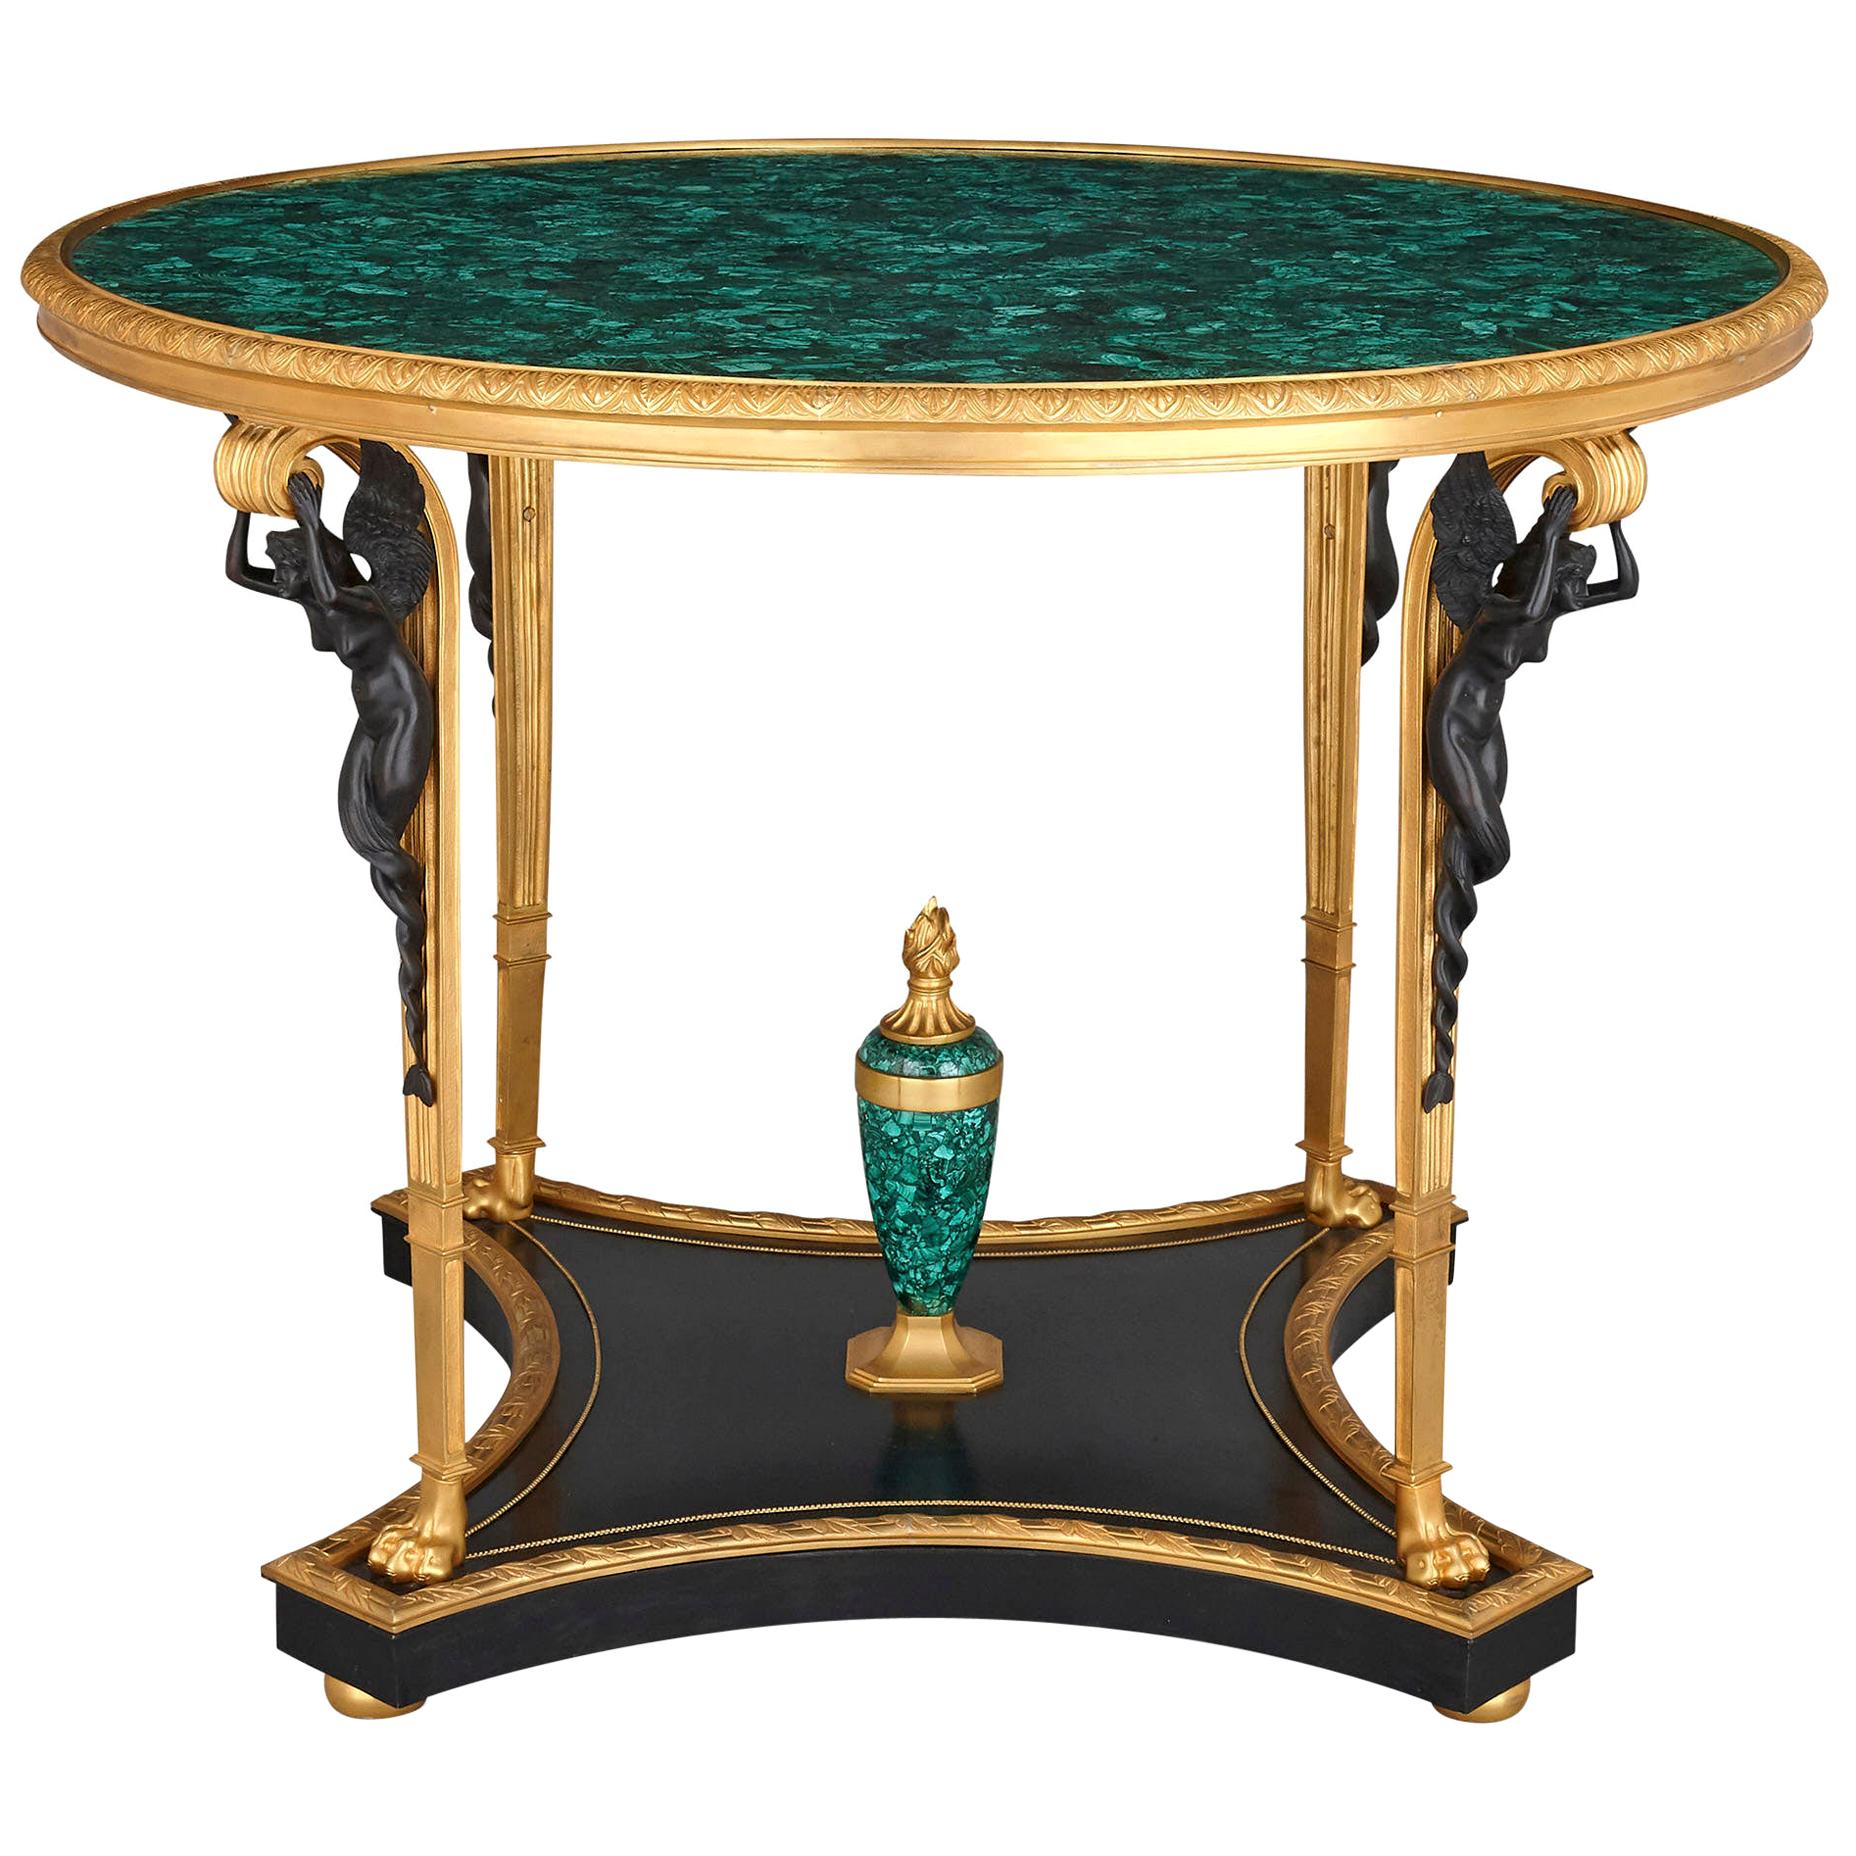 French Malachite, Gilt and Patinated Bronze Centre Table